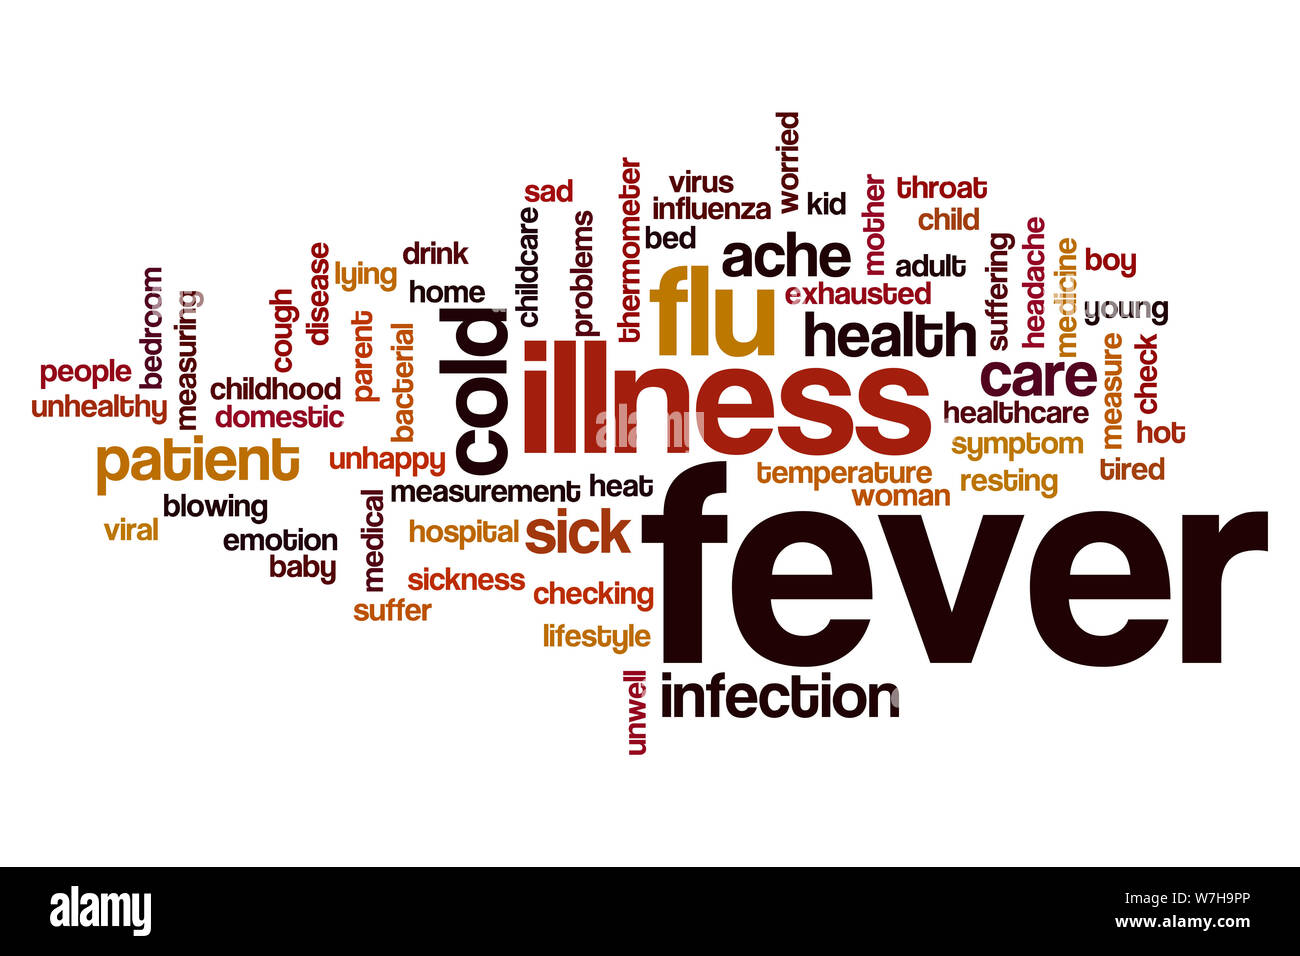 Fever word cloud concept Stock Photo